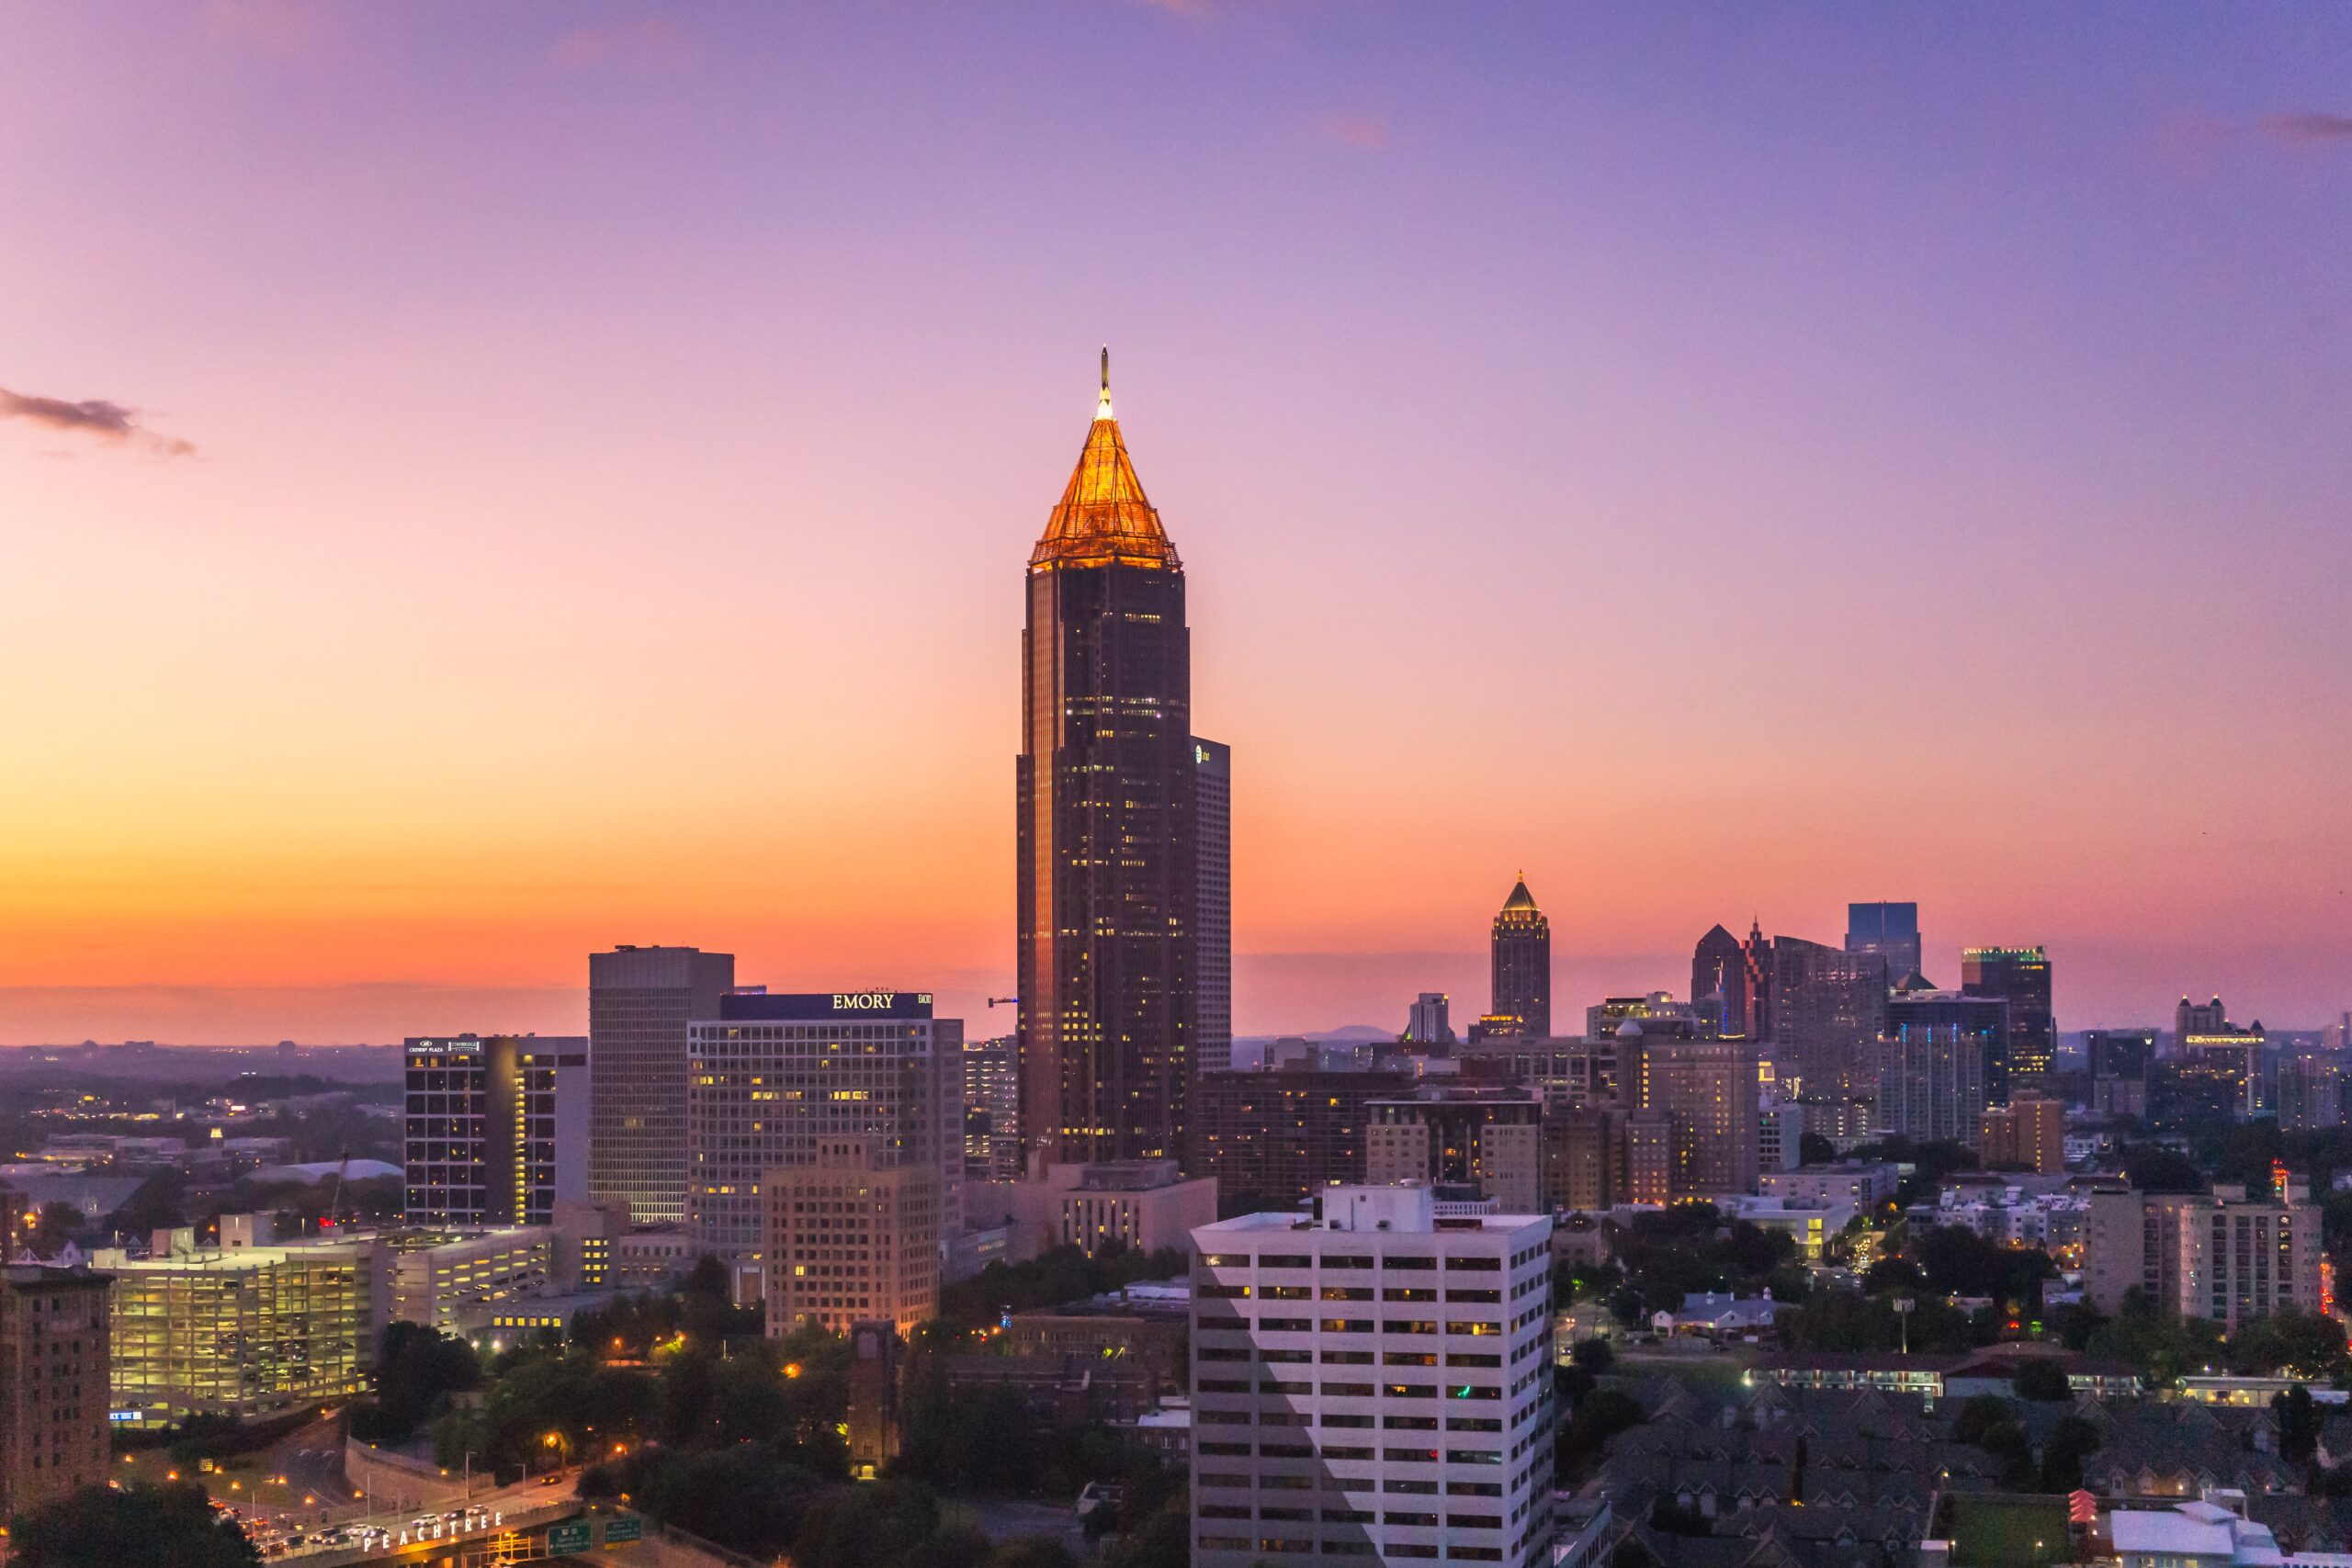 Atlanta is one of the best places in Georgia to live for shopping, luxury services, restaurants and cool activities. Pictured: The Midtown Atlanta skyline.